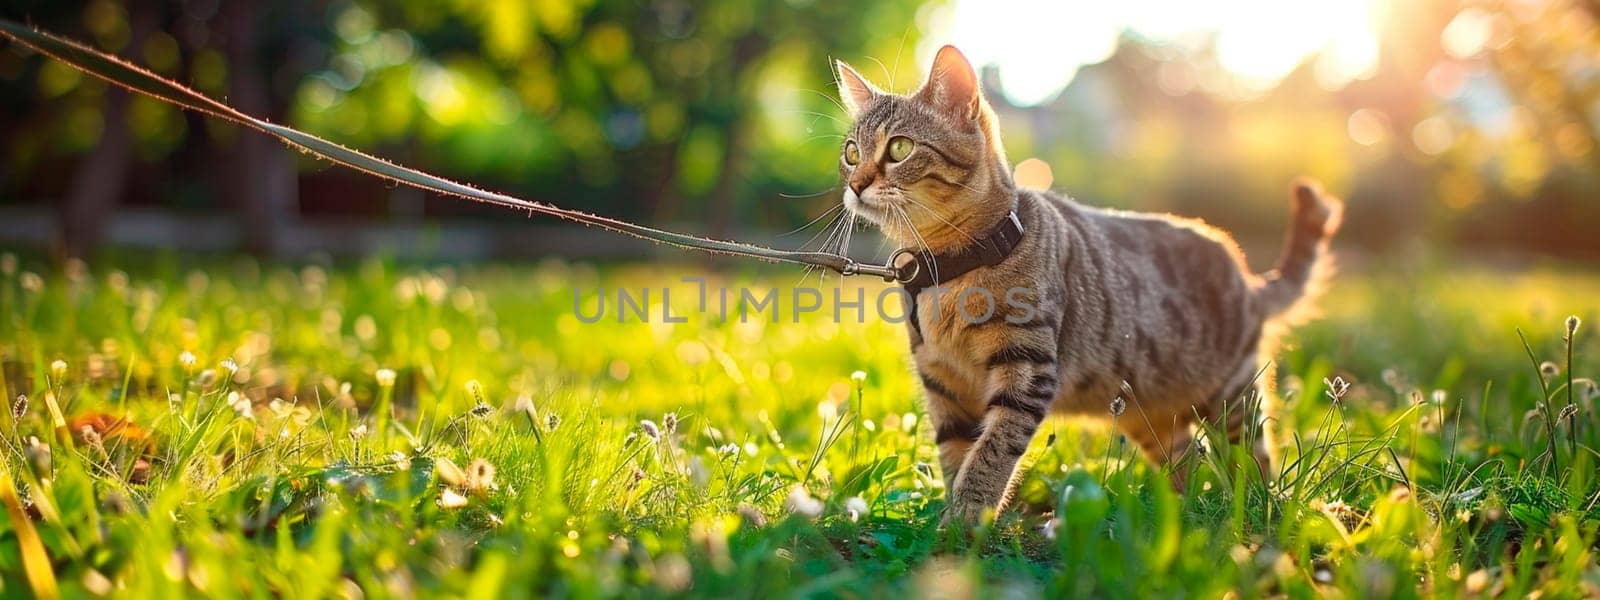 the cat walks on a leash in the park. Selective focus. animal.